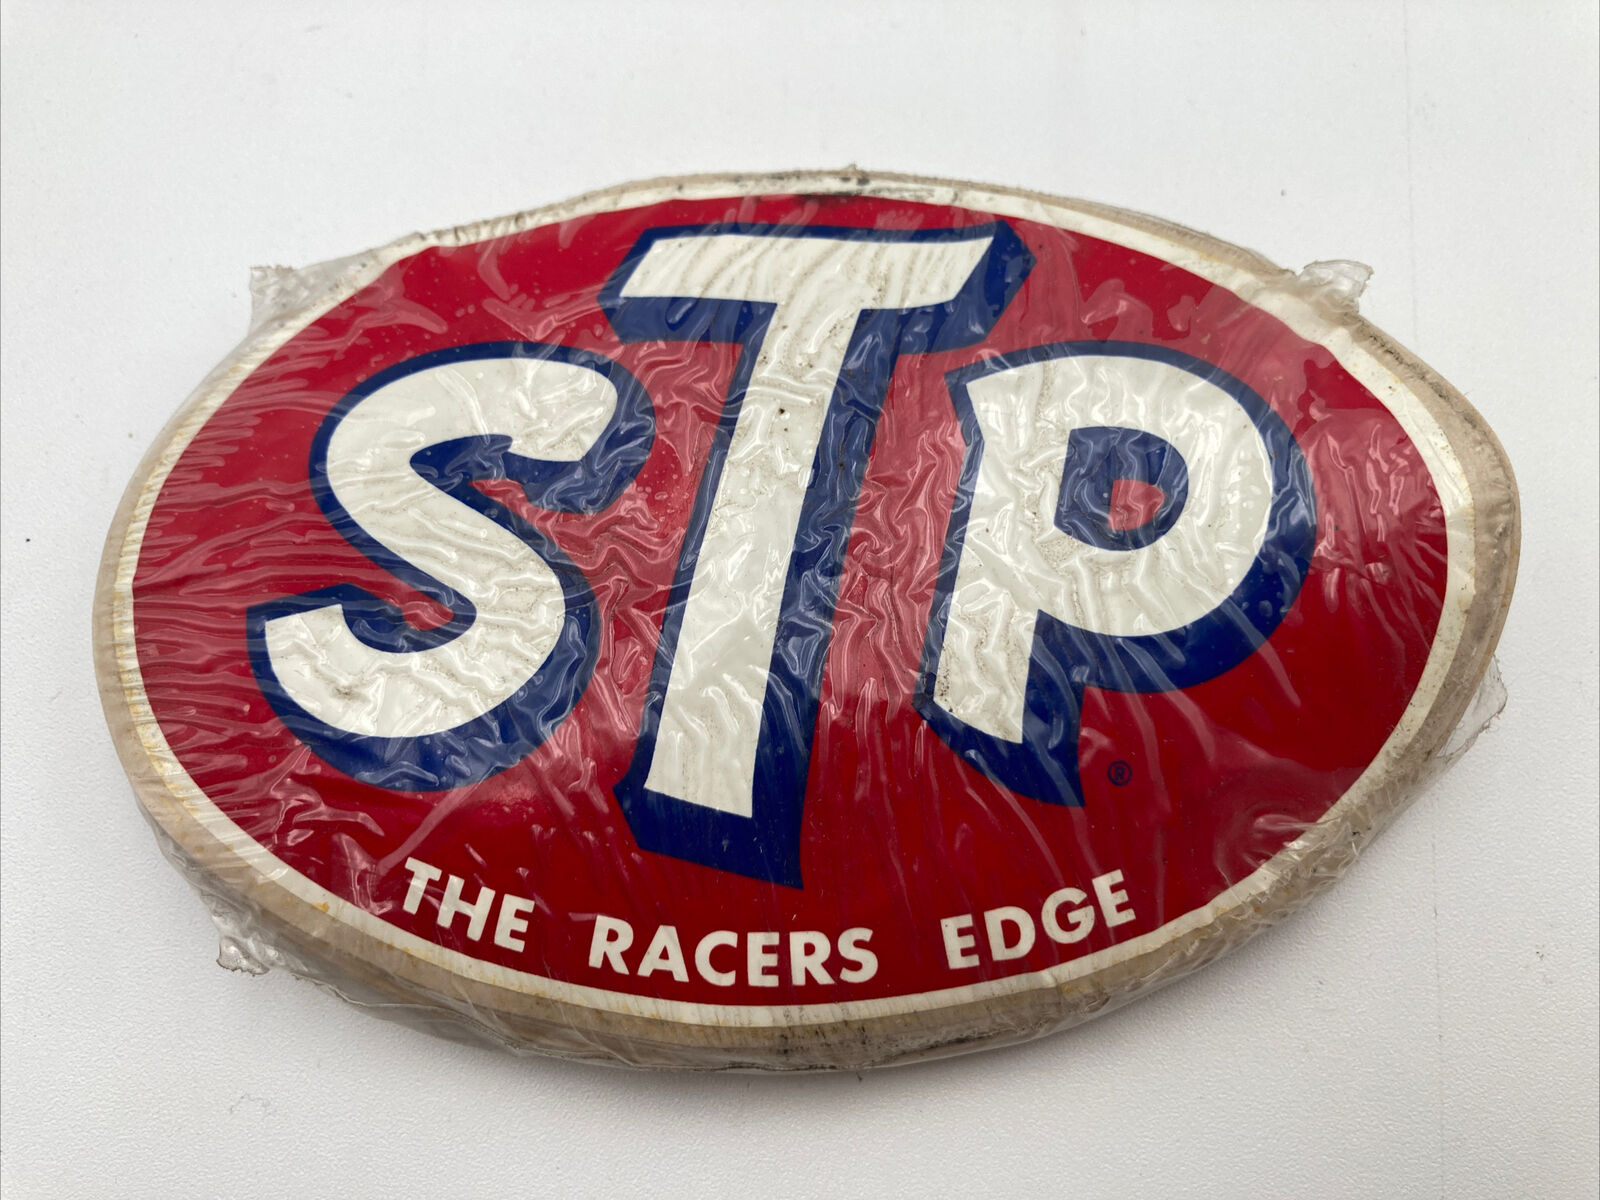 RARE UNOPENED PACKAGE OF VINTAGE STP THE RACERS EDGE STICKERS